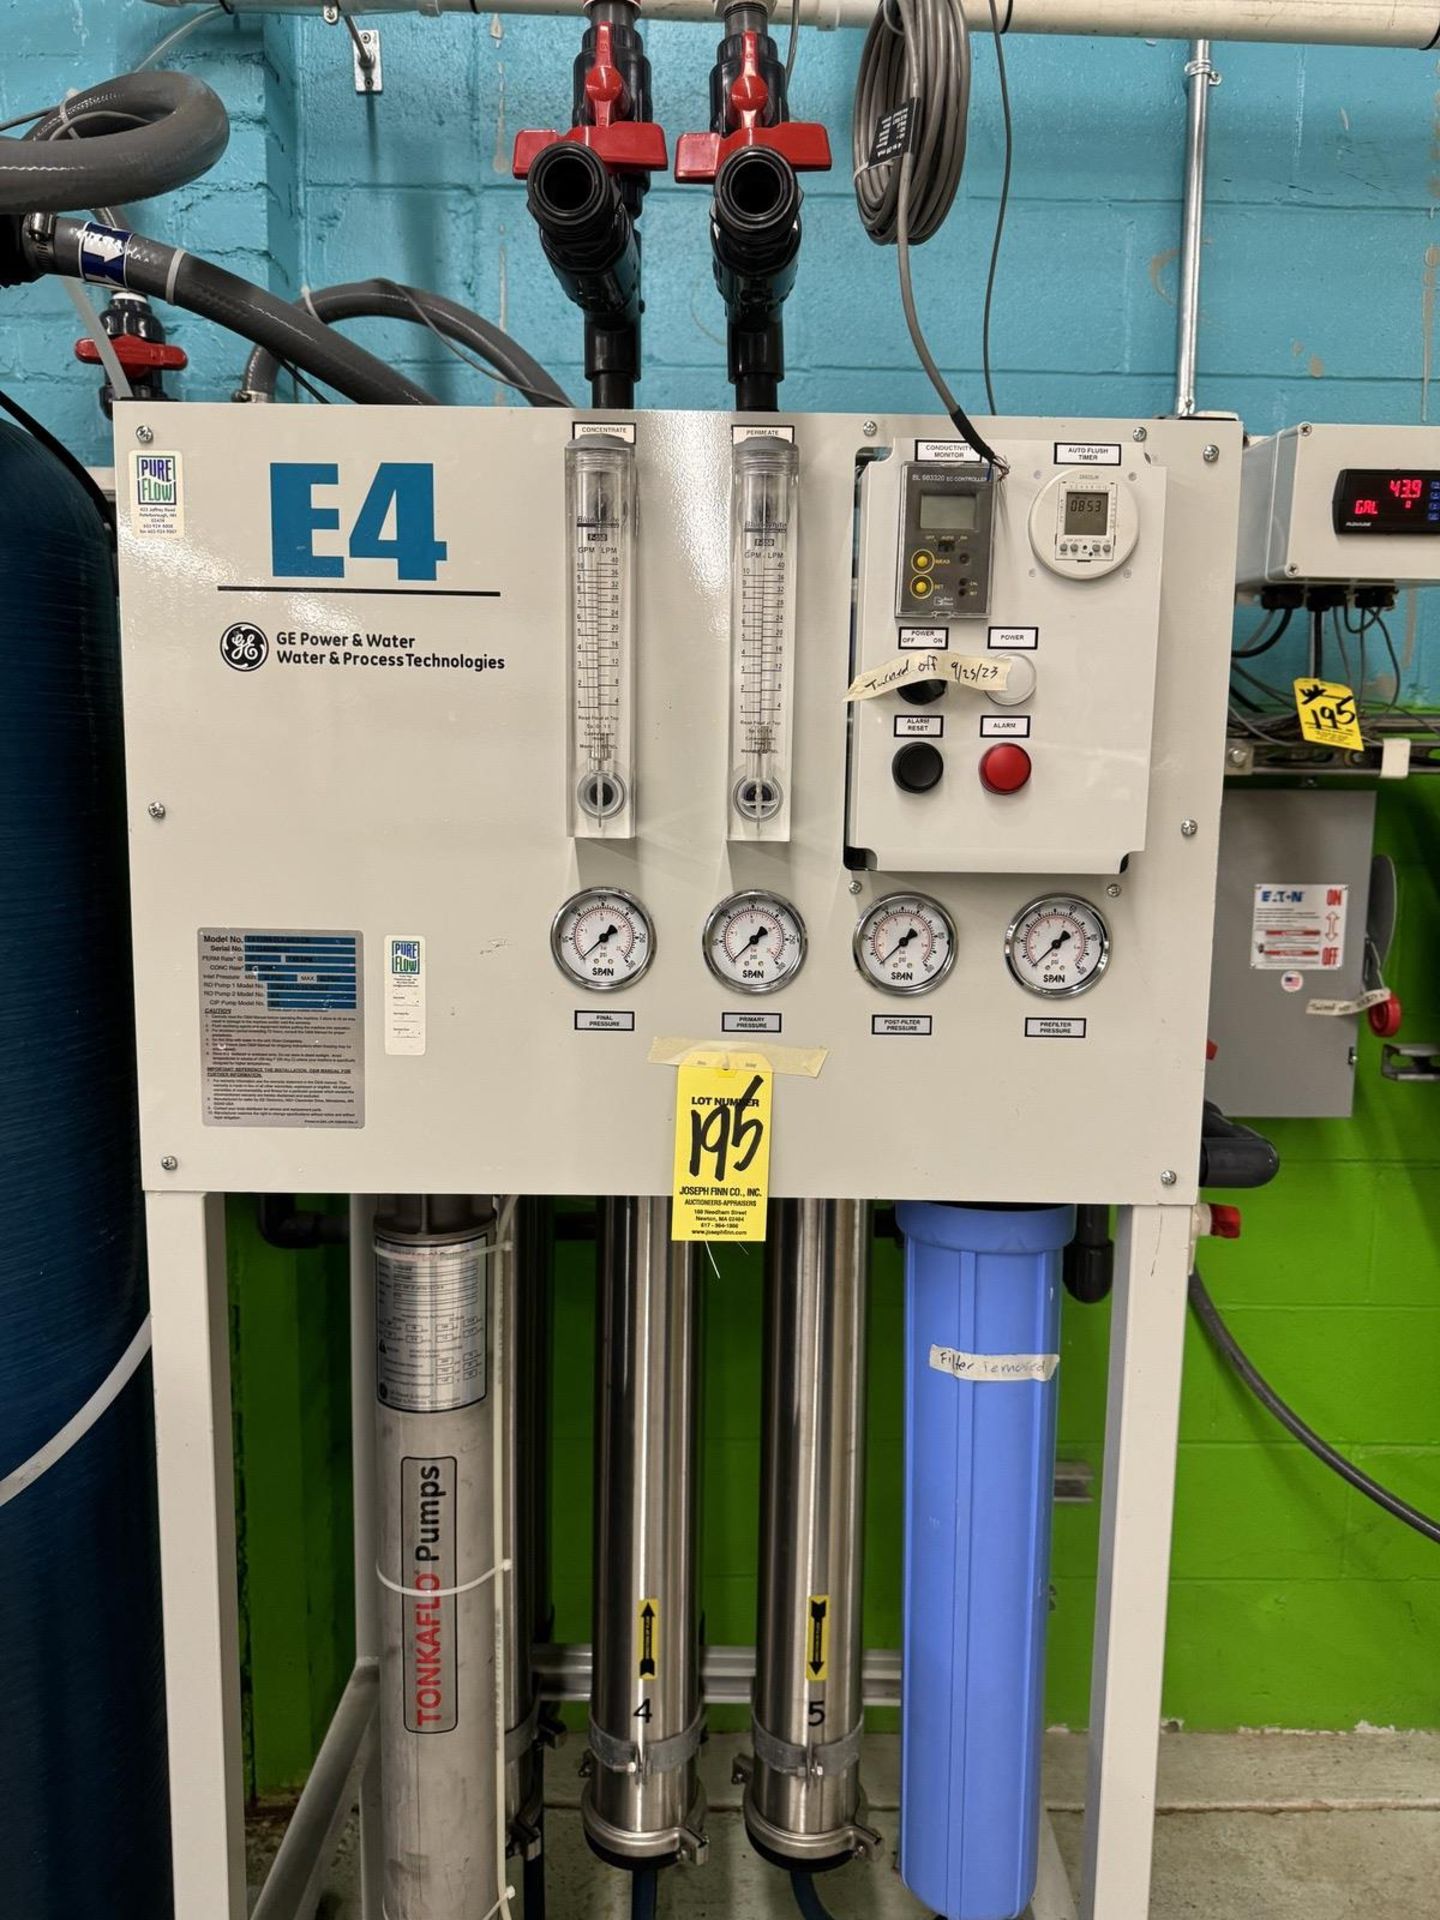 RO System Including GE Power & Water Process Technologies Model E4-110000-DLX-460,6 CW, s/n 17- - Bild 2 aus 22